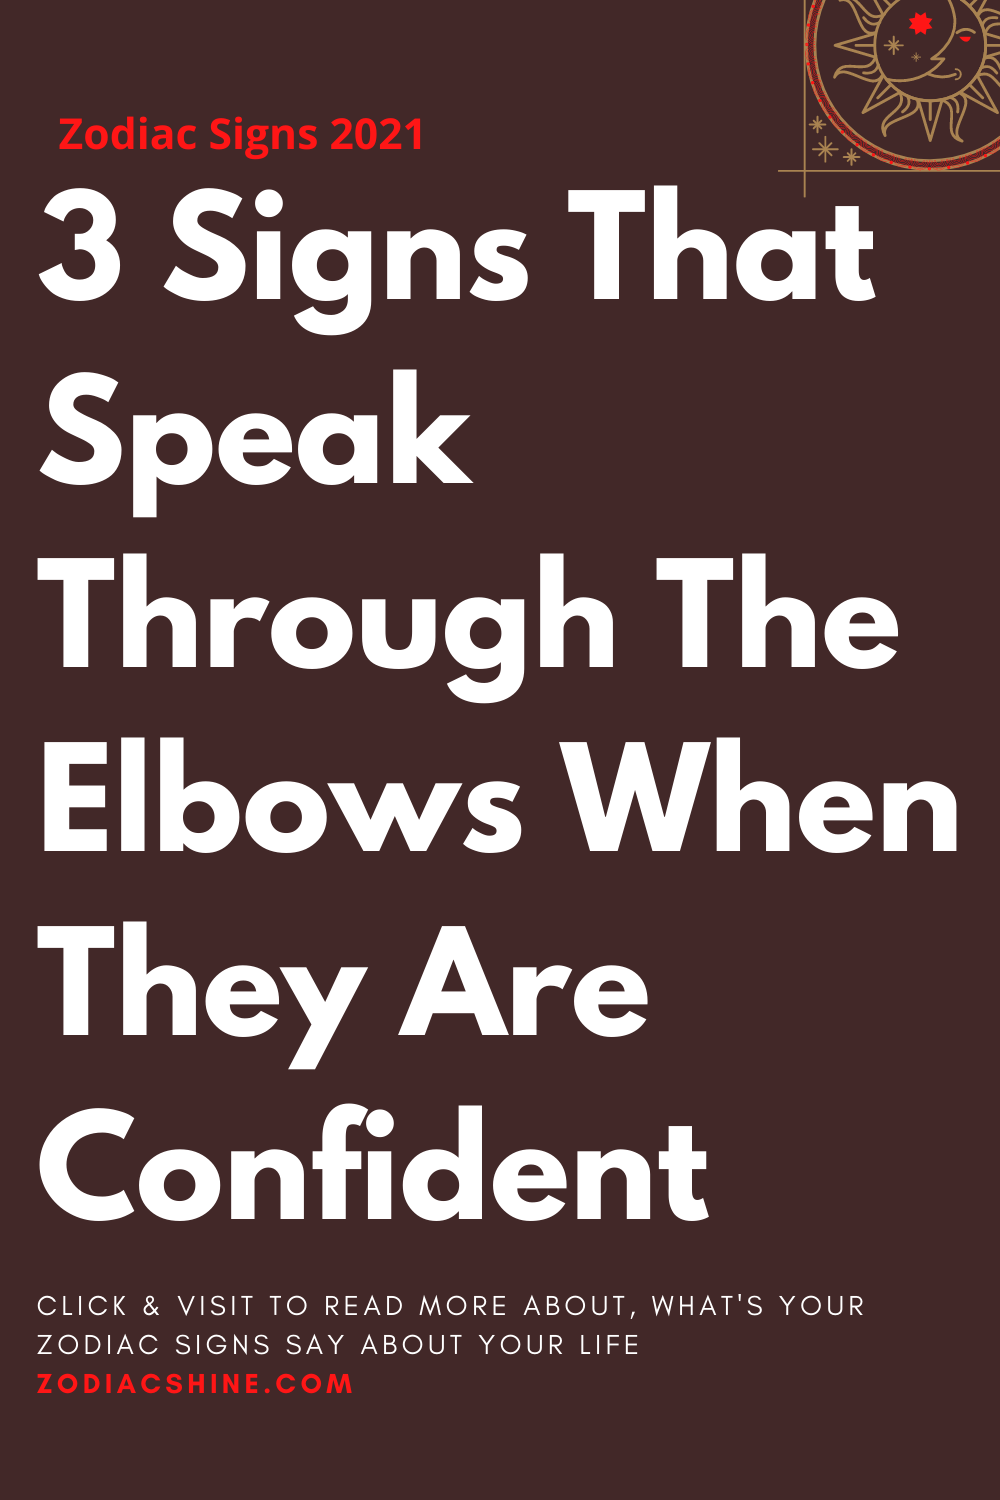 3 Signs That Speak Through The Elbows When They Are Confident